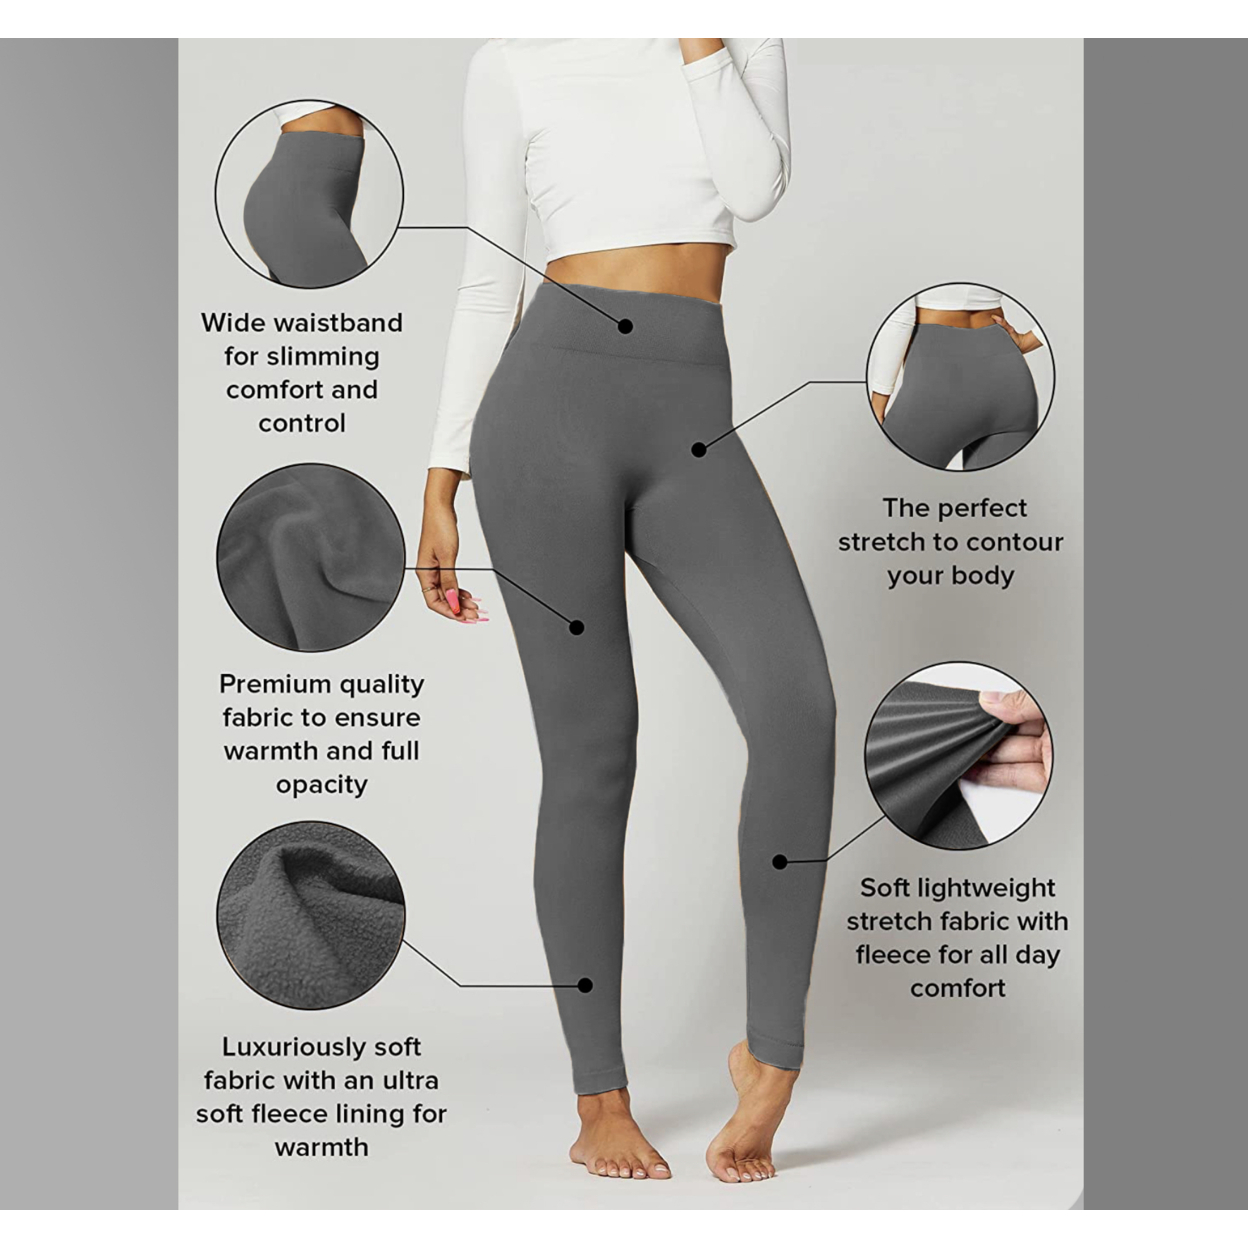 Multipack - High-Waisted Premium Quality Fleece Lined Leggings (S-4X) - Small/Medium, 3-Pack, Grey